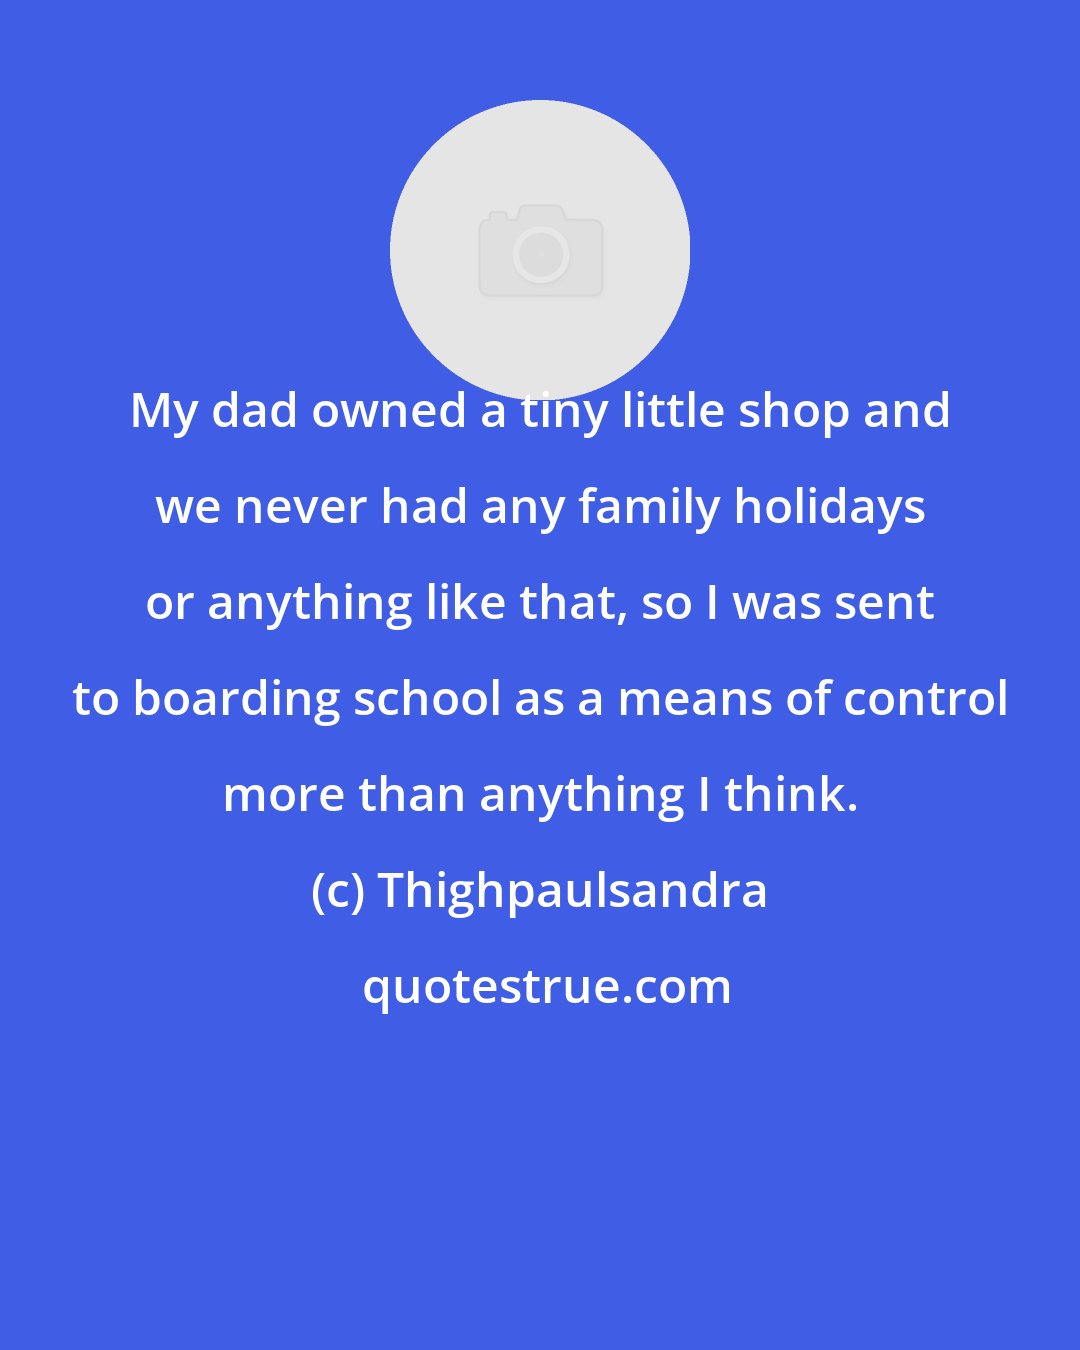 Thighpaulsandra: My dad owned a tiny little shop and we never had any family holidays or anything like that, so I was sent to boarding school as a means of control more than anything I think.